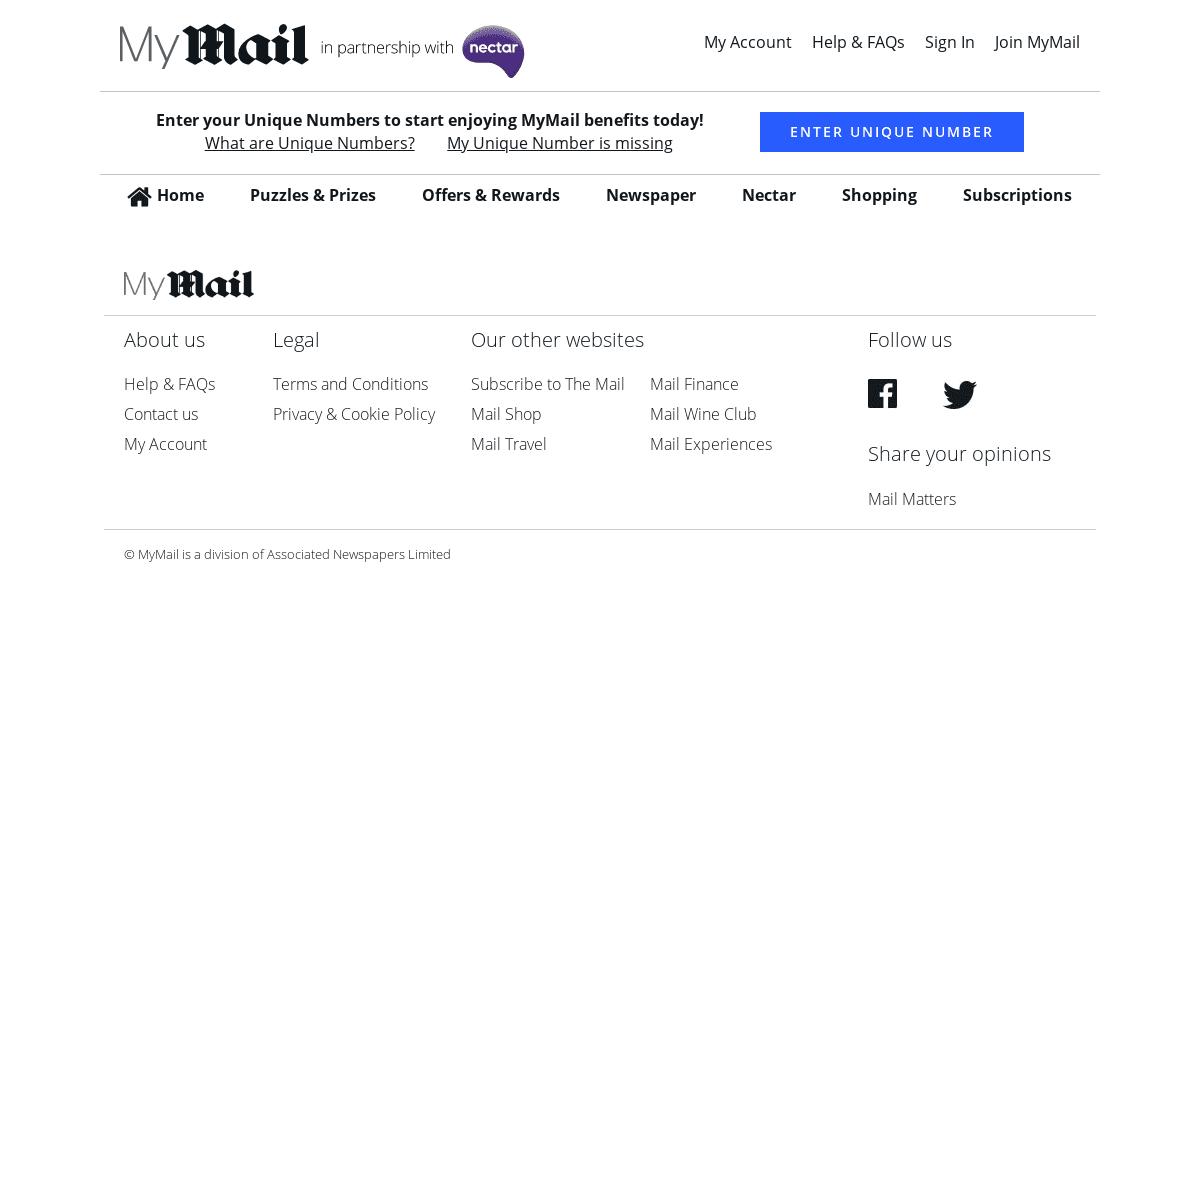 A complete backup of https://mymail.co.uk